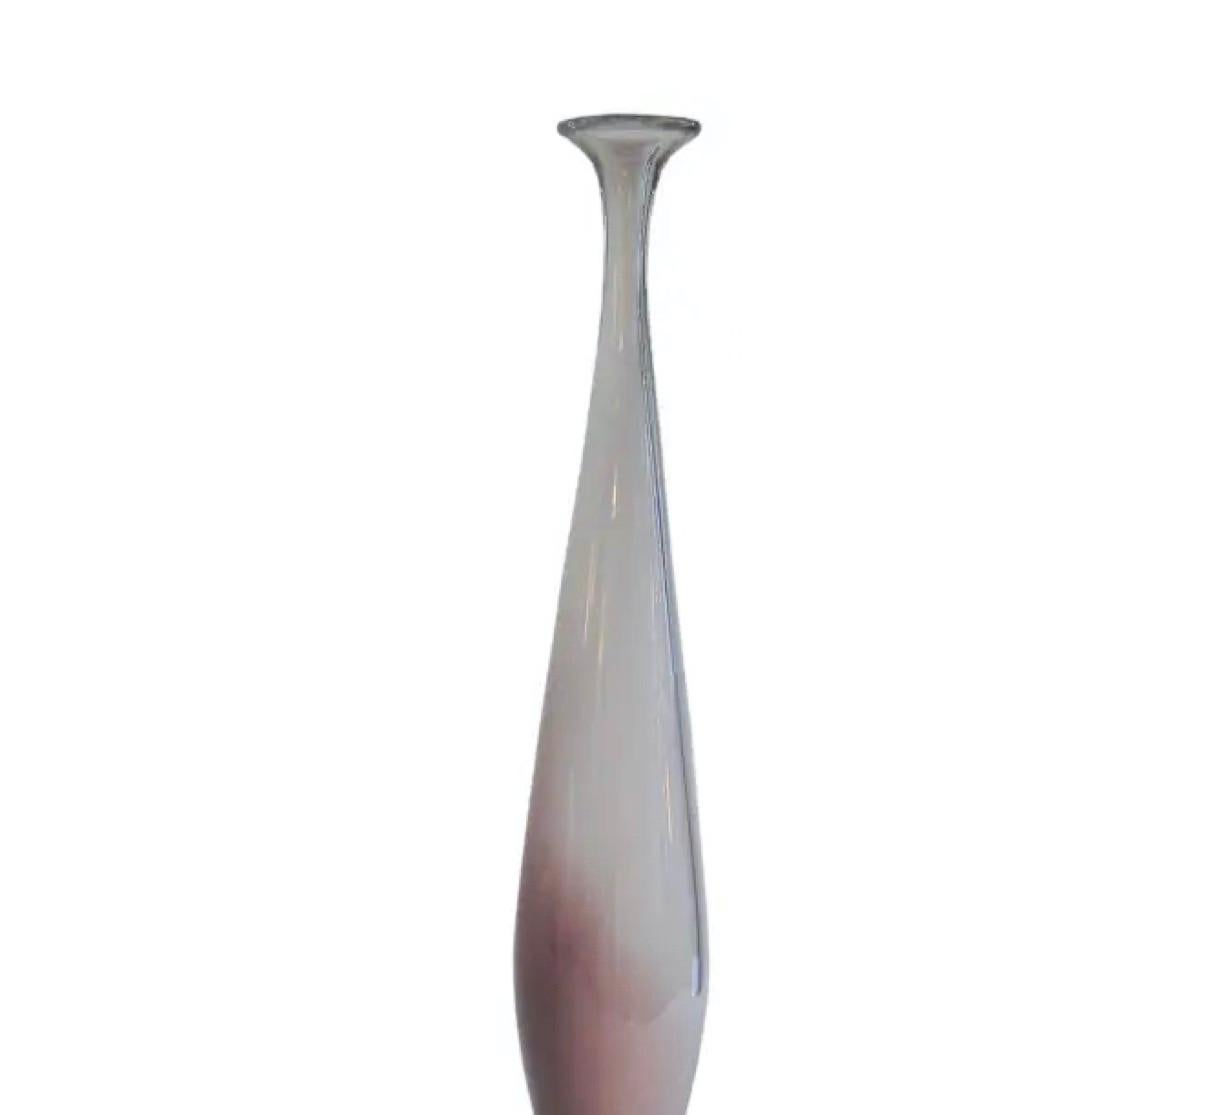 Mid Century glass artist Nils Landberg's Tall Expo Tulip Vase was designed for Orrefors glassworks in the 1950's. This delicately tinted vase is hand blown glass signed with incised signature to underside: [Orrefors Expo NU 137 - 54].

Image 6: